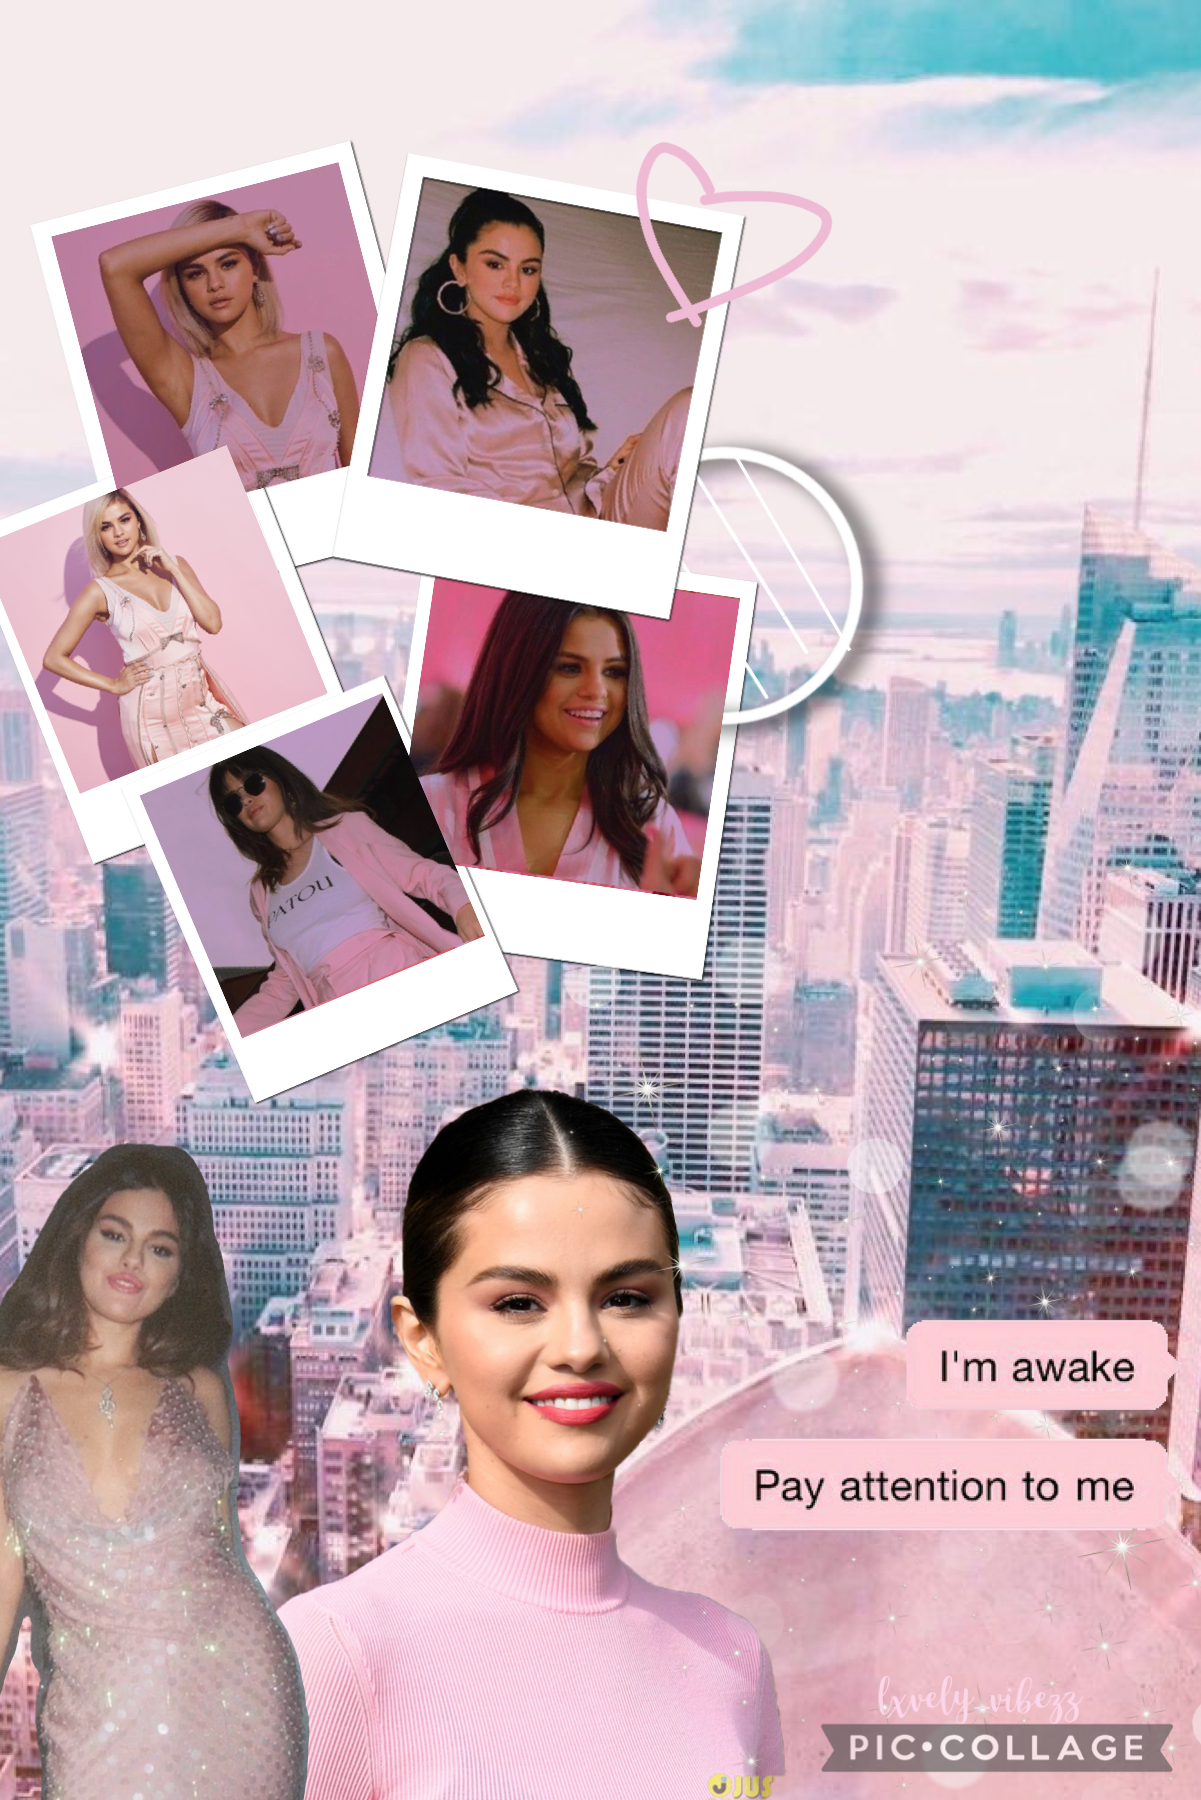 Selena Gomez Soft Pink Theme 💕

This is a special series! Check out part 2 on me_4lifes page, this is part 1 :) 